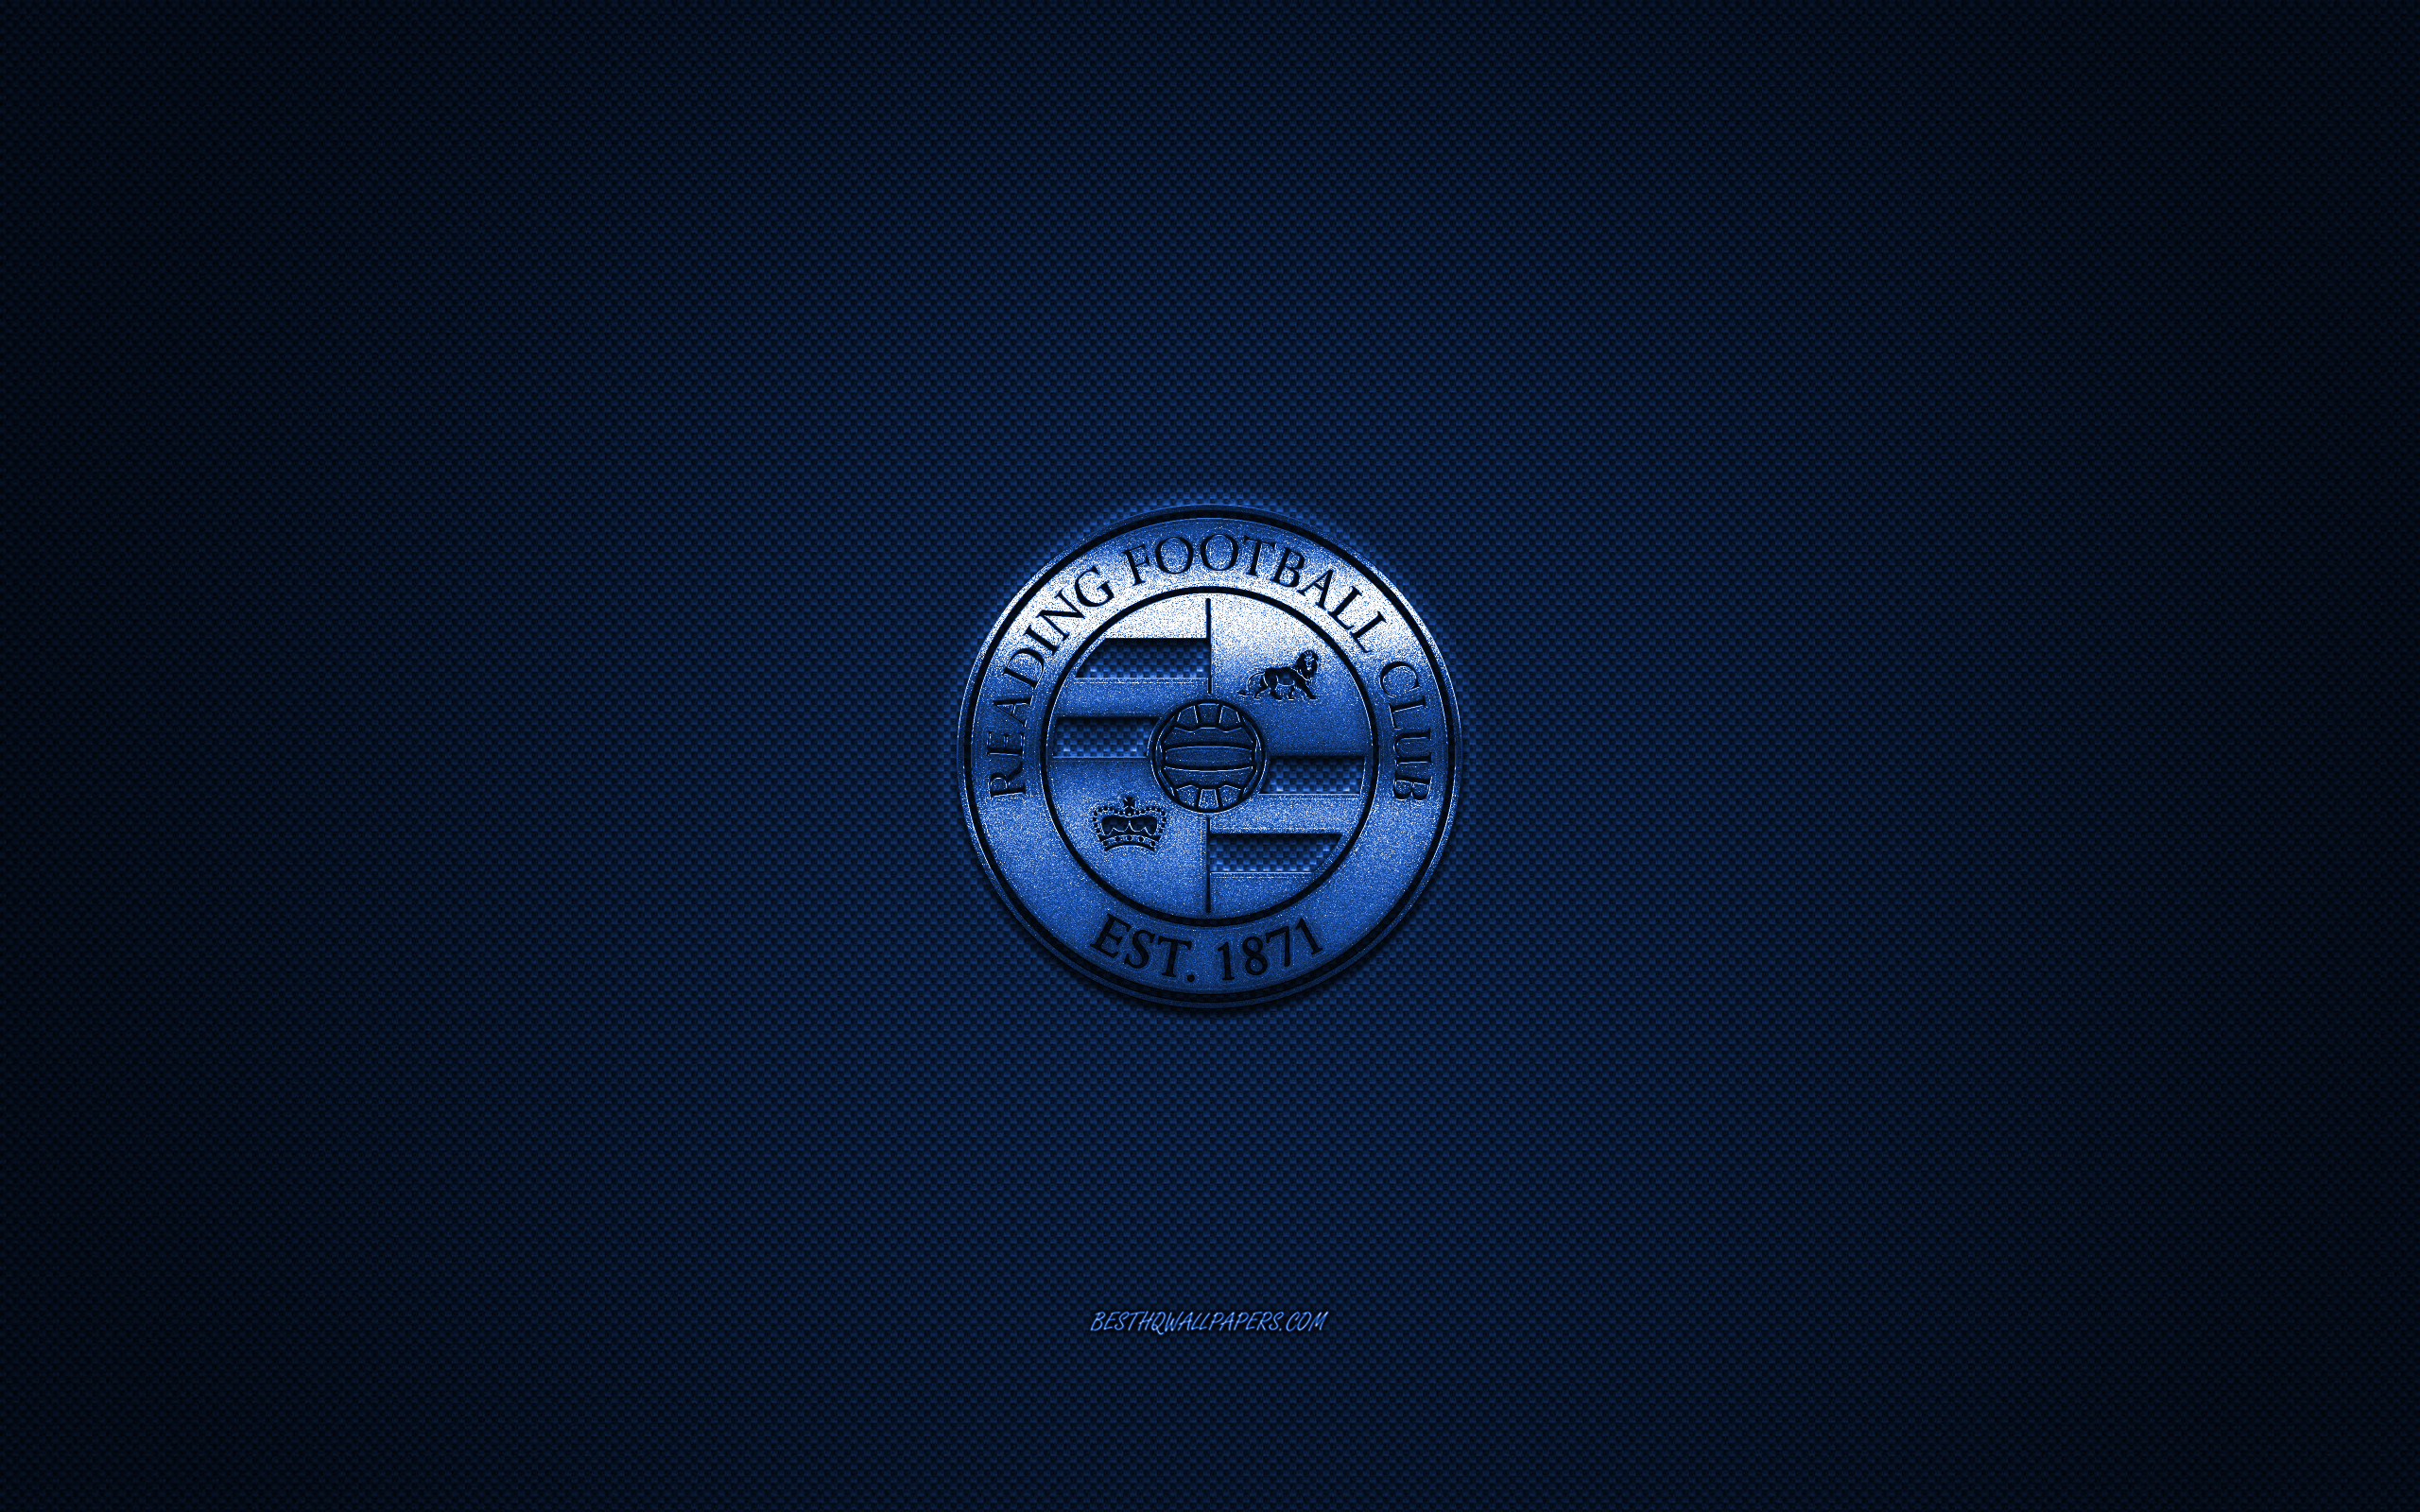 Download wallpaper Reading FC, English football club, EFL Championship, blue logo, blue carbon fiber background, football, Reading, England, Reading FC logo for desktop with resolution 2560x1600. High Quality HD picture wallpaper